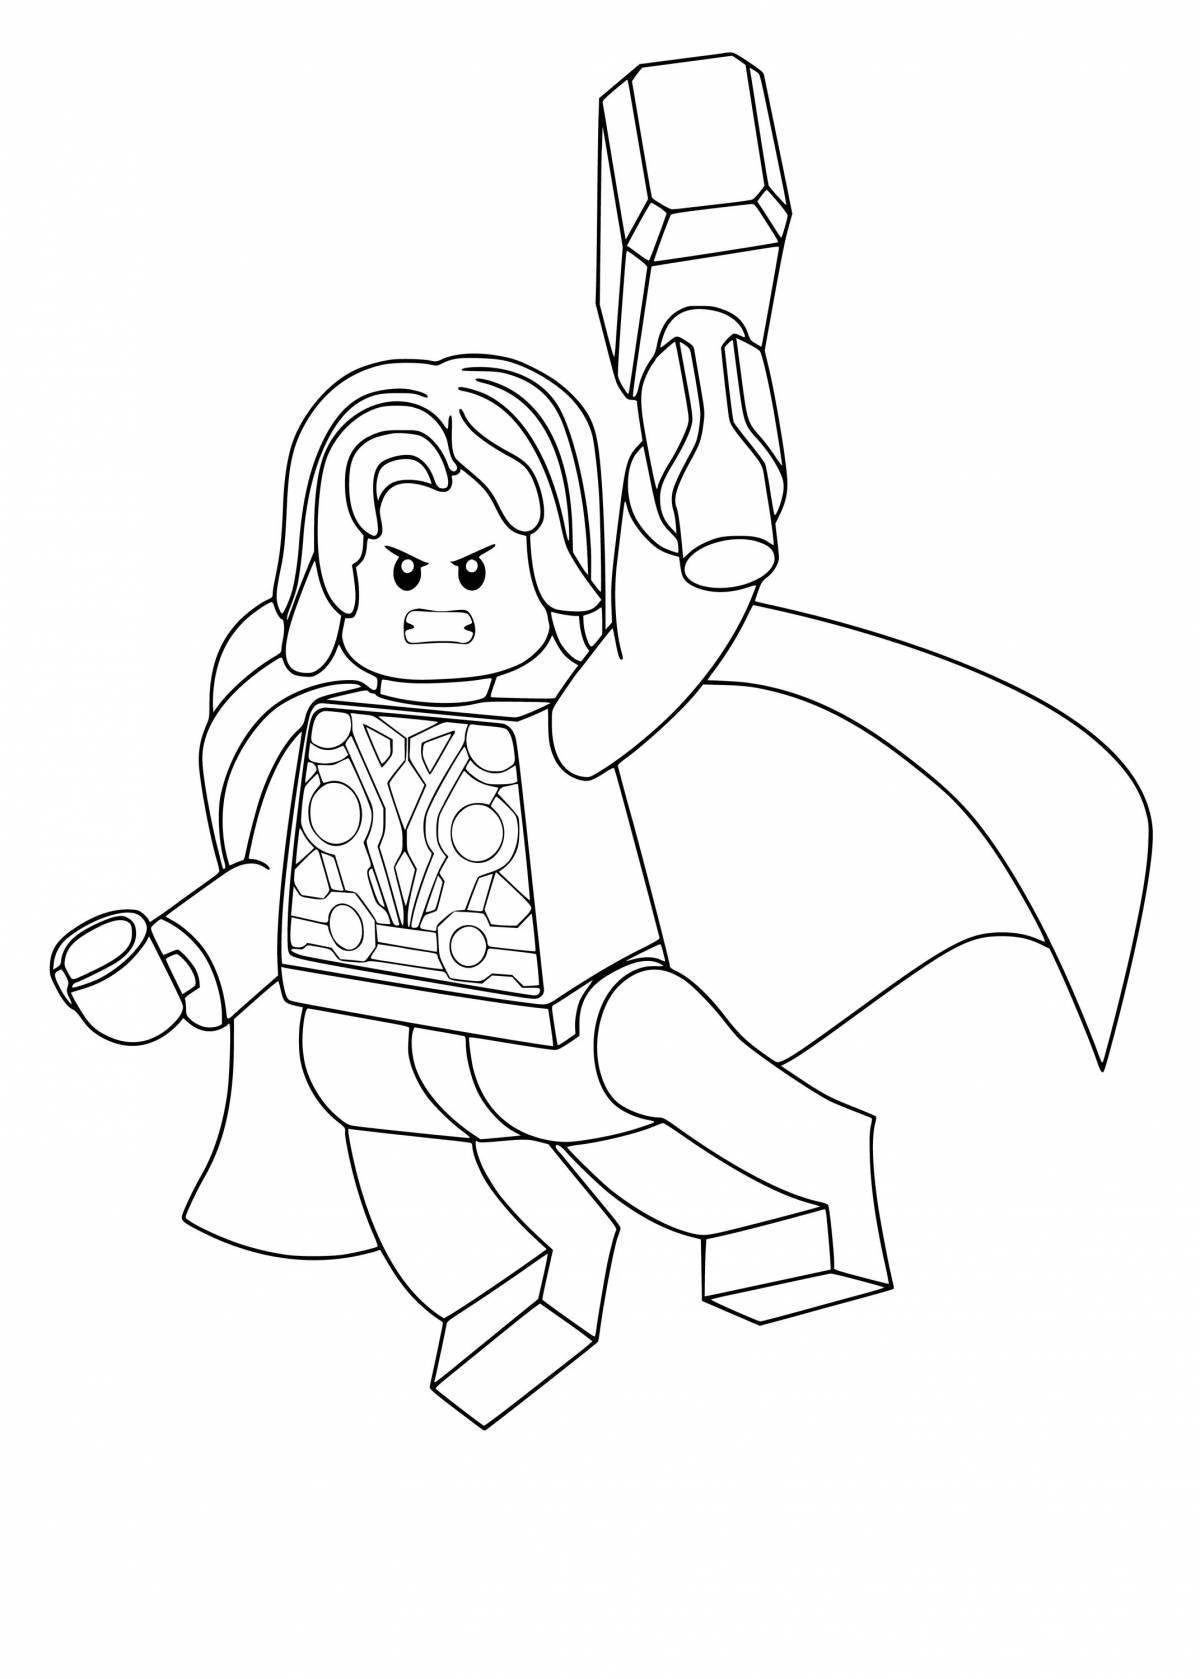 Exalted thor marvel coloring book